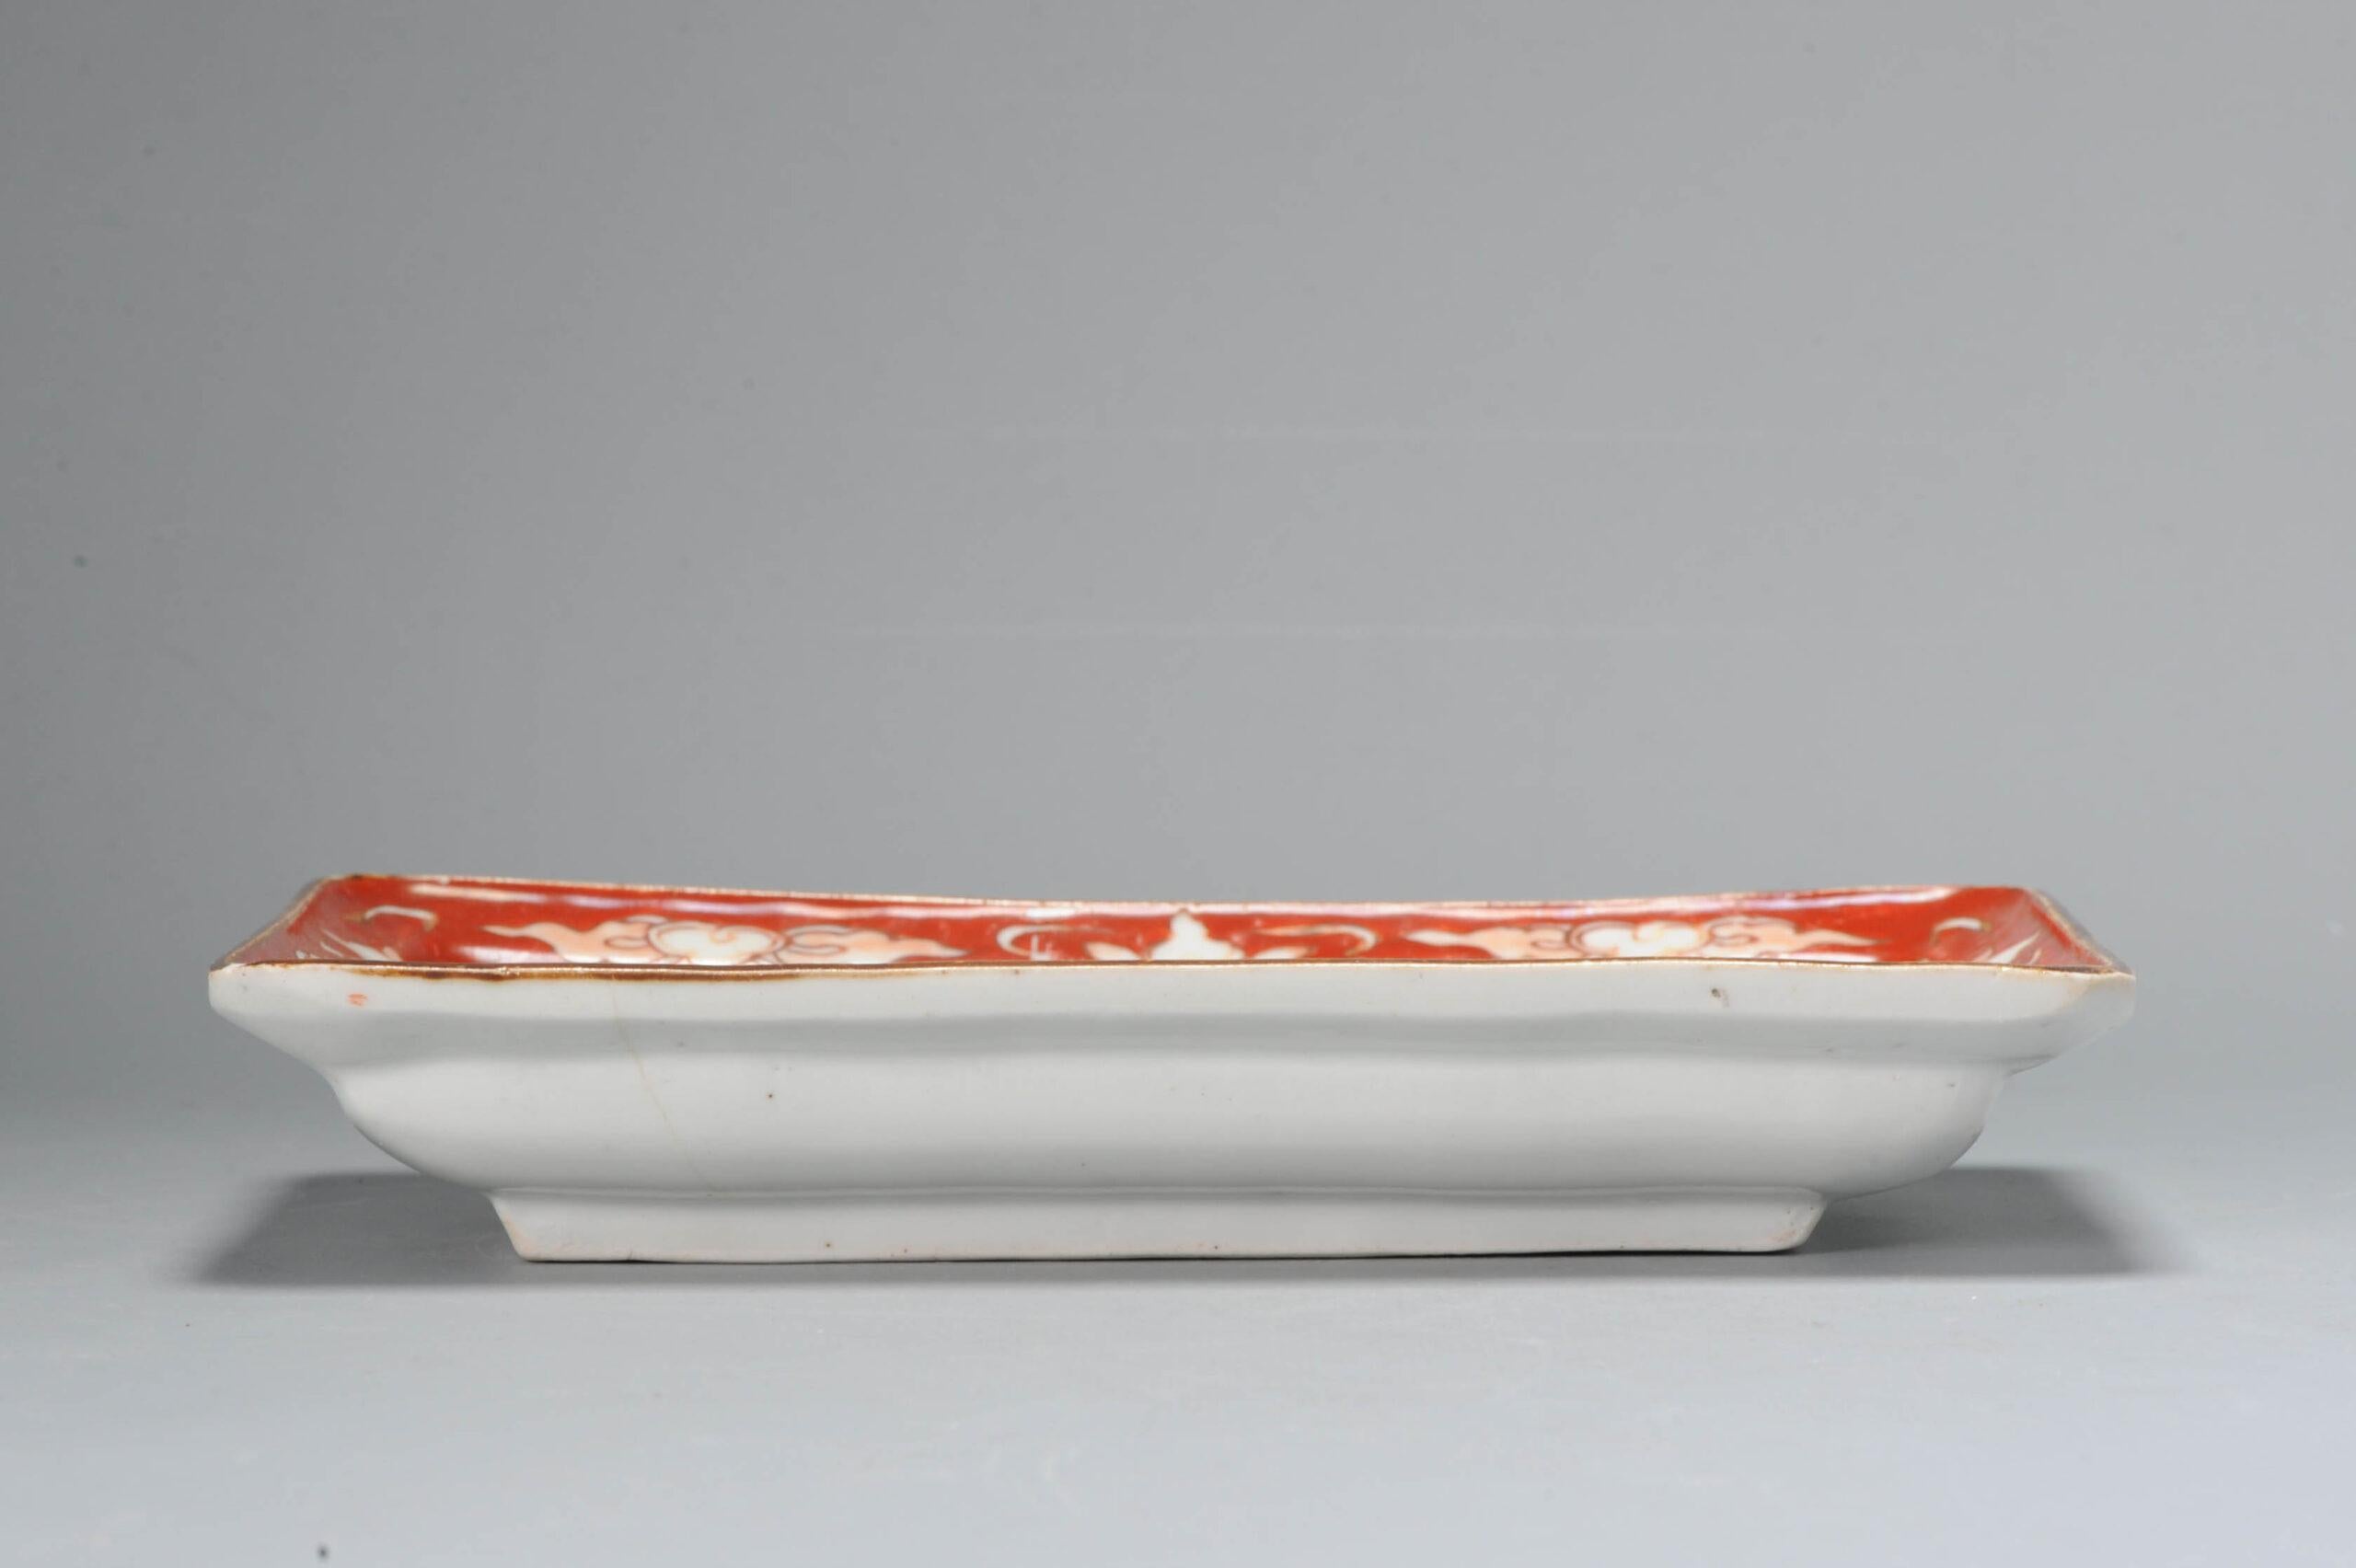 A very nice Ko-Kutani serving dish in red enamel with a central scene of a Foo dog or Lion. The ground has ajour decoration. Early piece.

Additional information:
Material: Porcelain & Pottery
Japanese Style: Kutani
Region of Origin: Japan
Period: